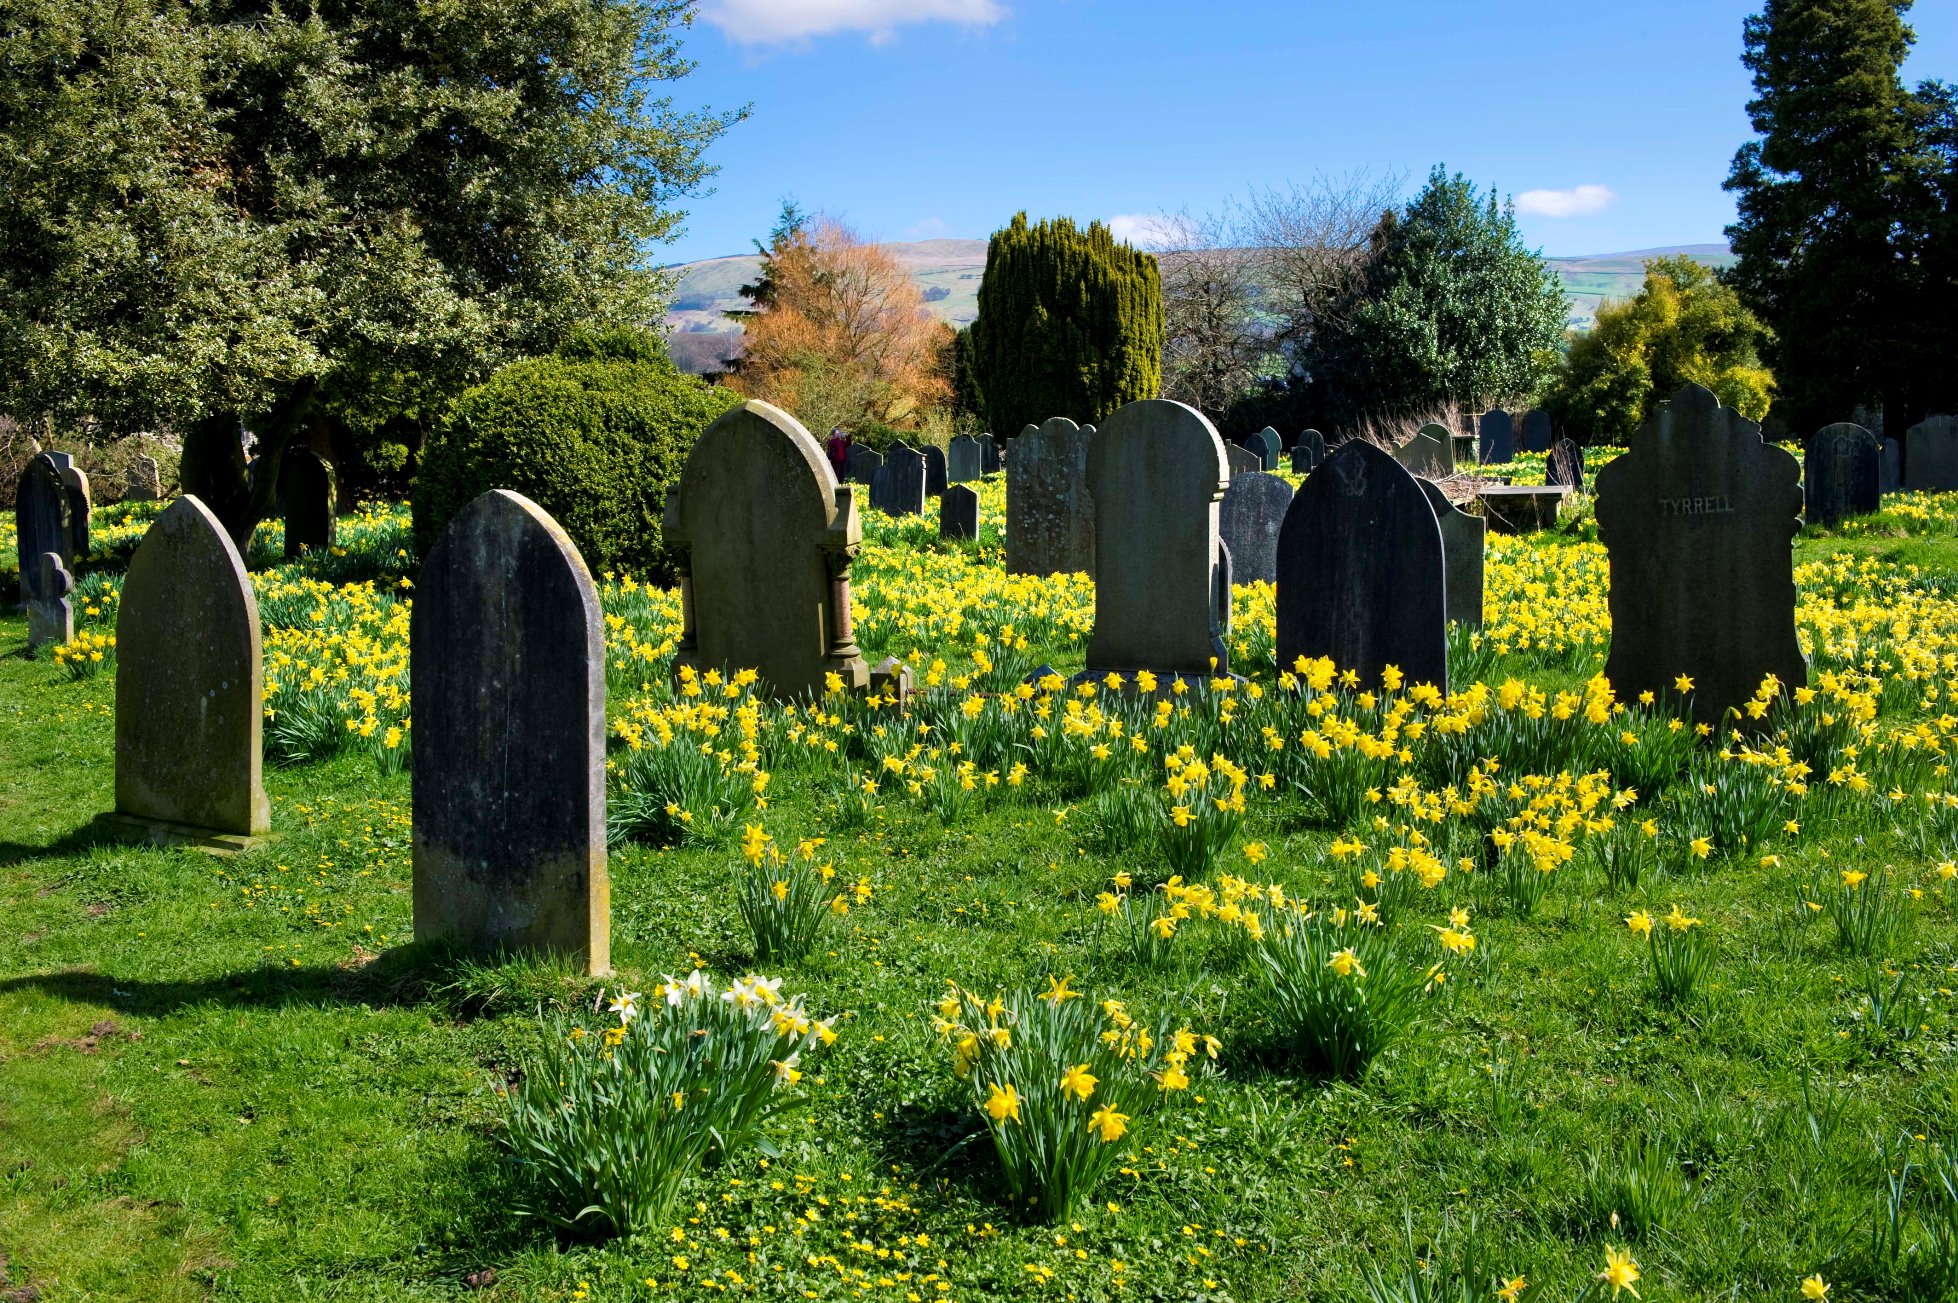 Church of St Mary, Kirkby Lonsdale, Cumbria. Daffodils in the churchyard among gravestones